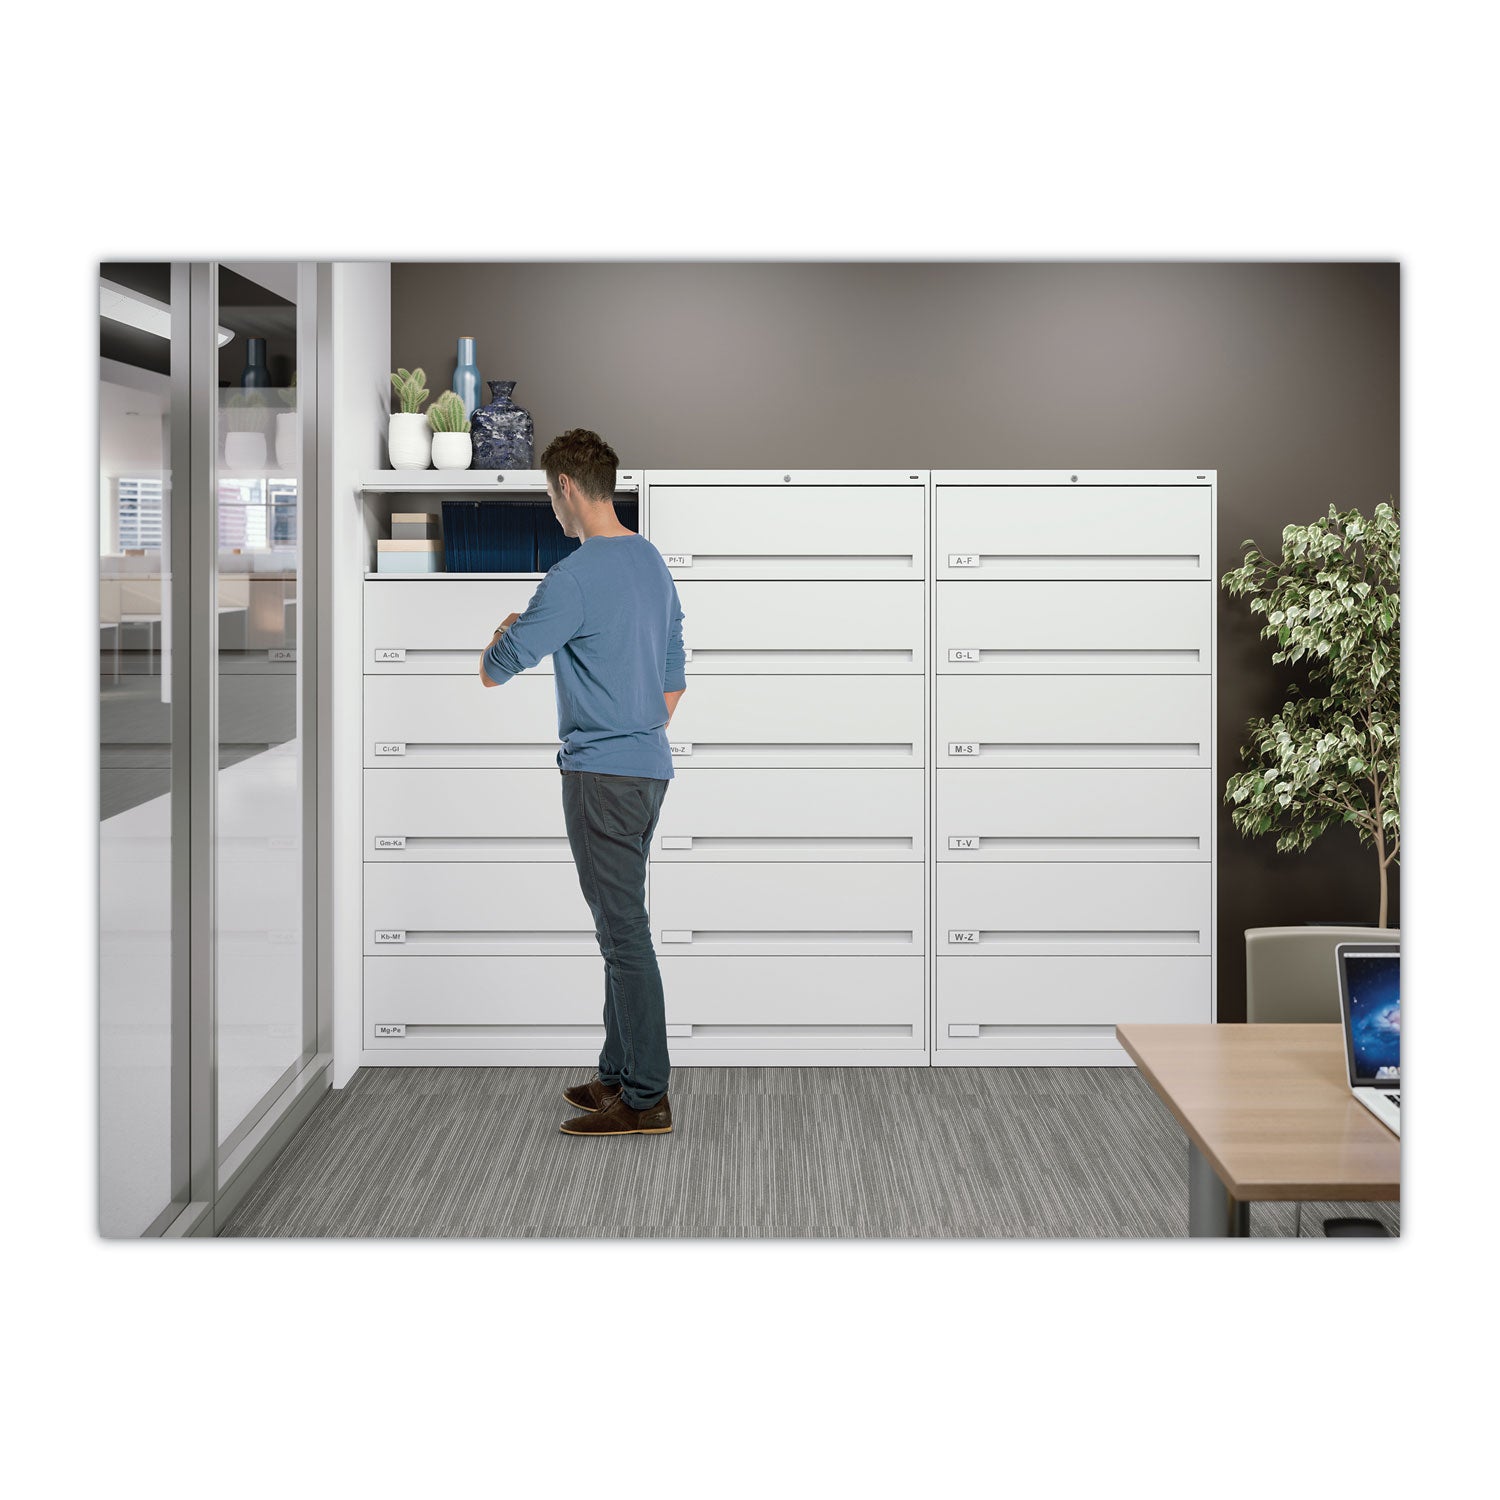 fixed-shelf-enclosed-format-lateral-file-for-end-tab-folders-6-legal-letter-file-shelves-light-gray-36-x-165-x-7525_tnnfs361llgy - 2